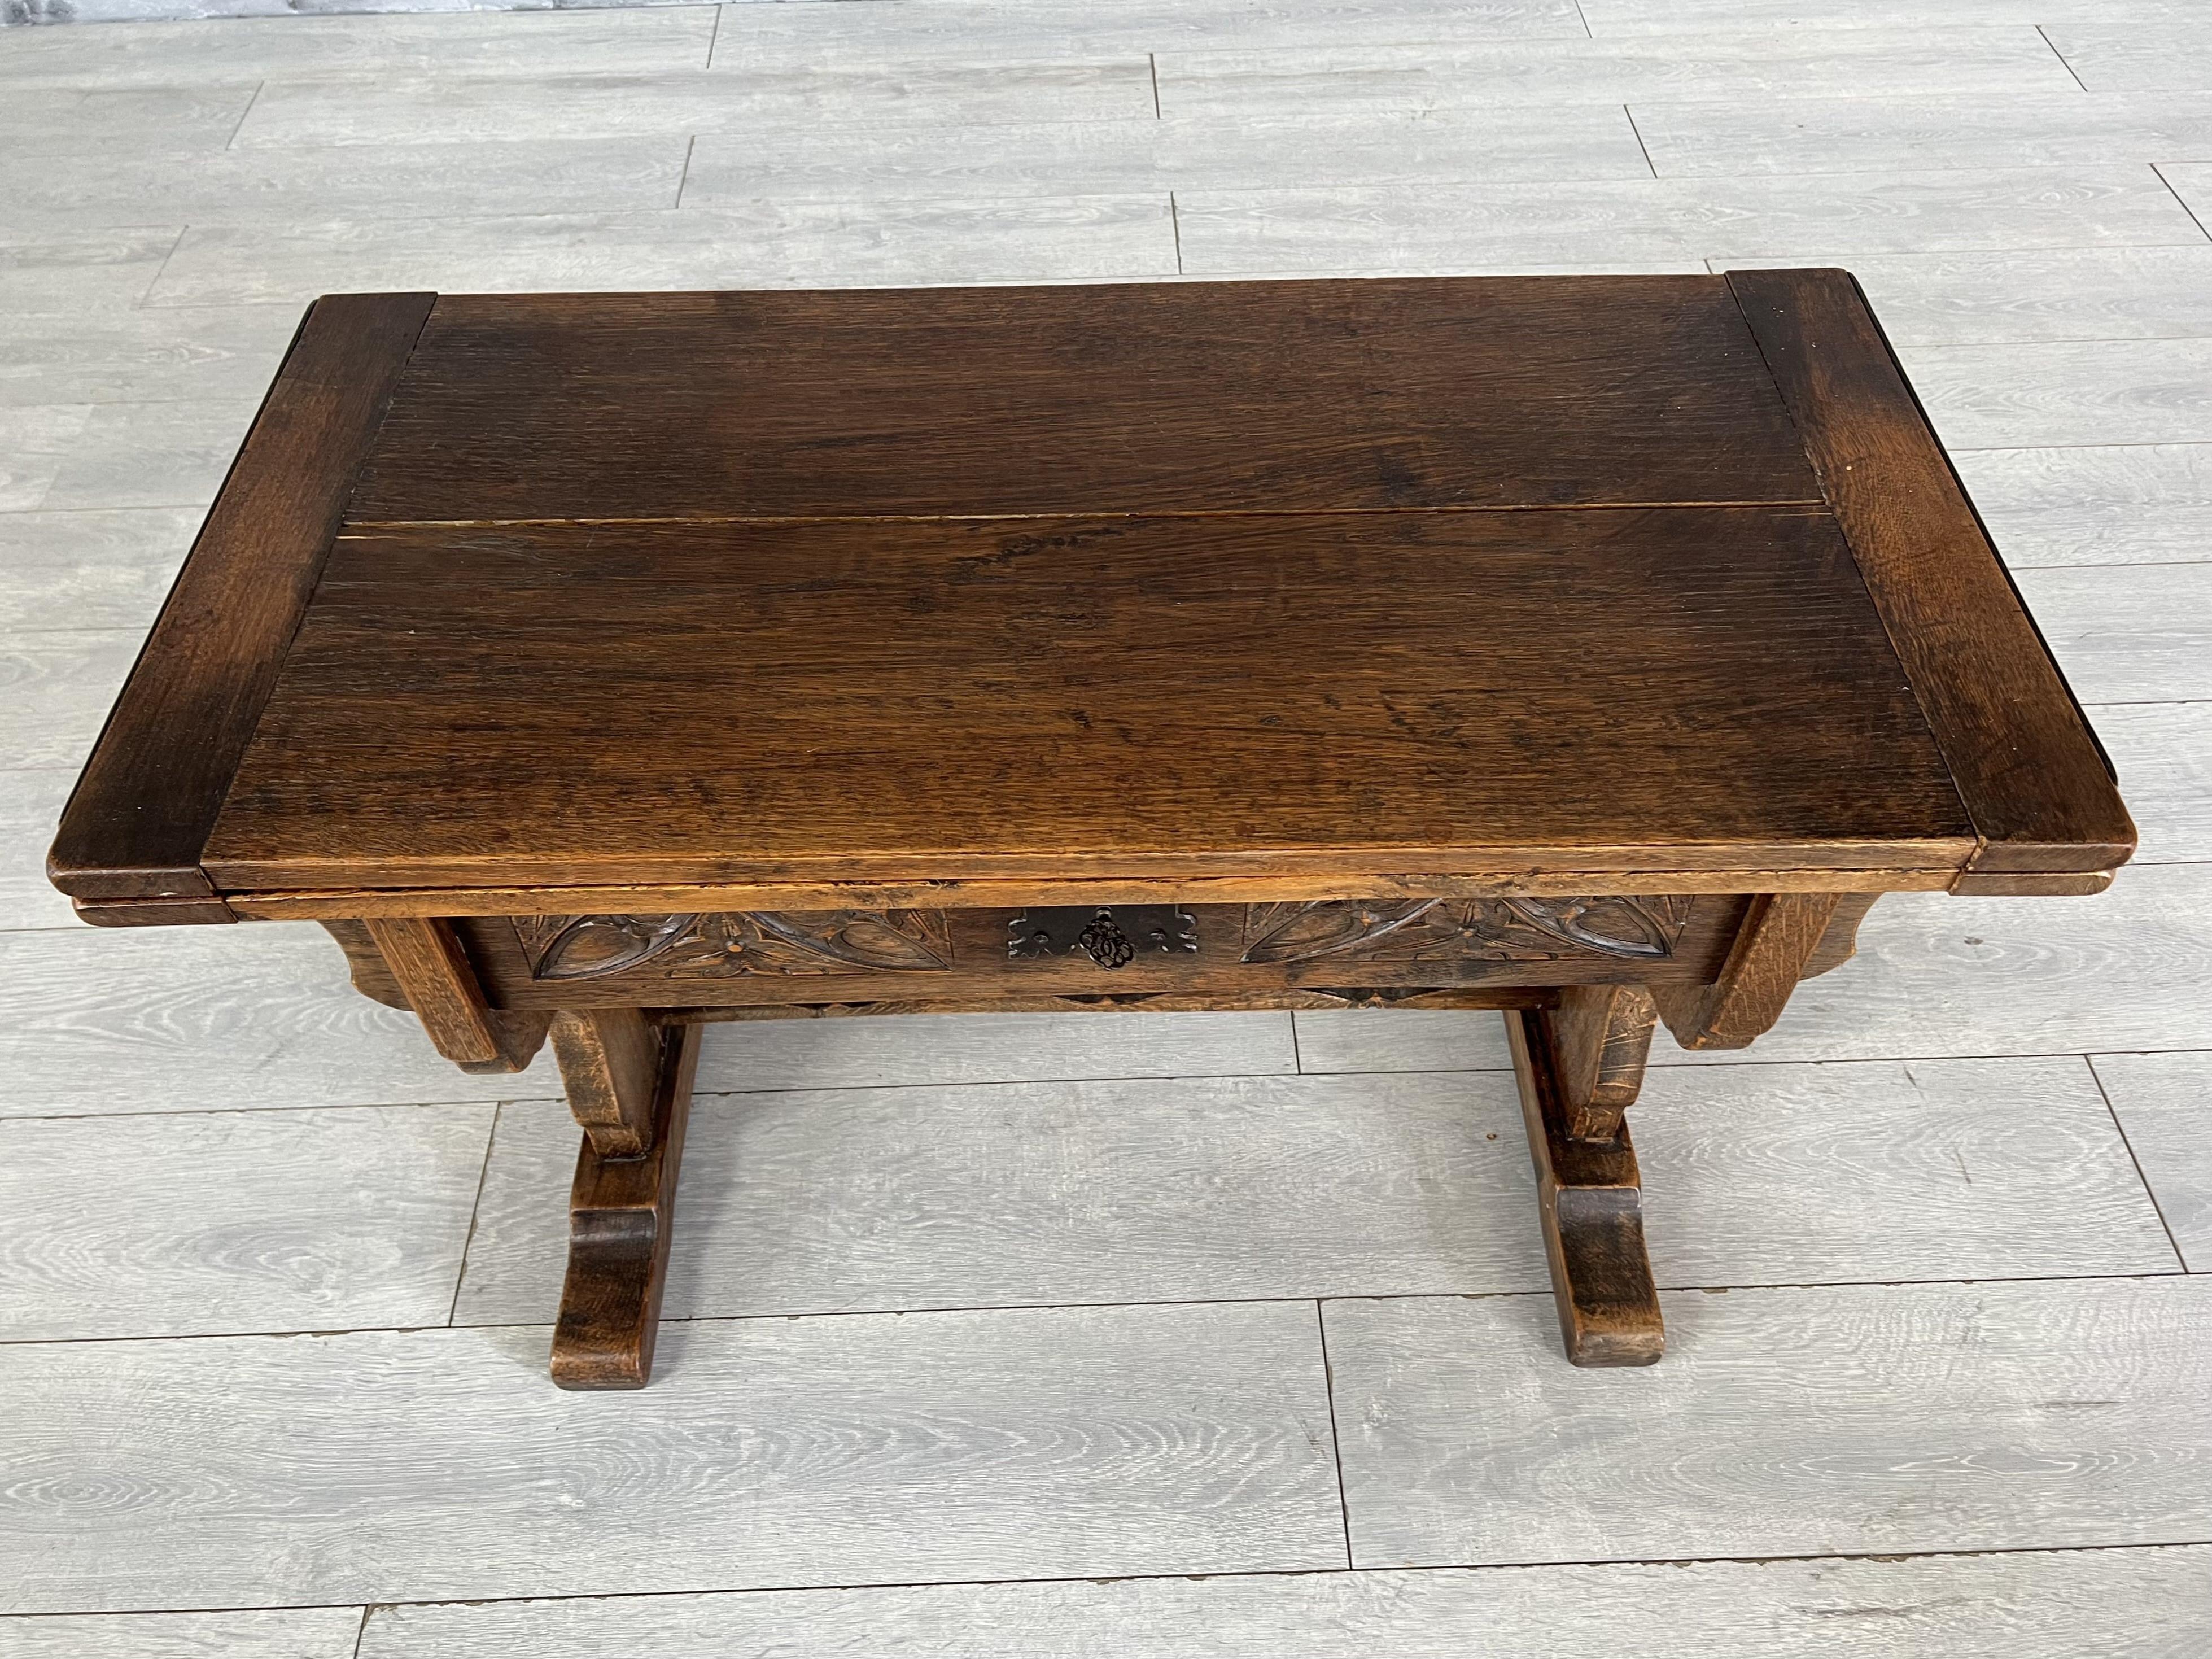 Antique Rustic Oak Extendable Coffee Side Table With Removable Top In Good Condition For Sale In Bridgeport, CT